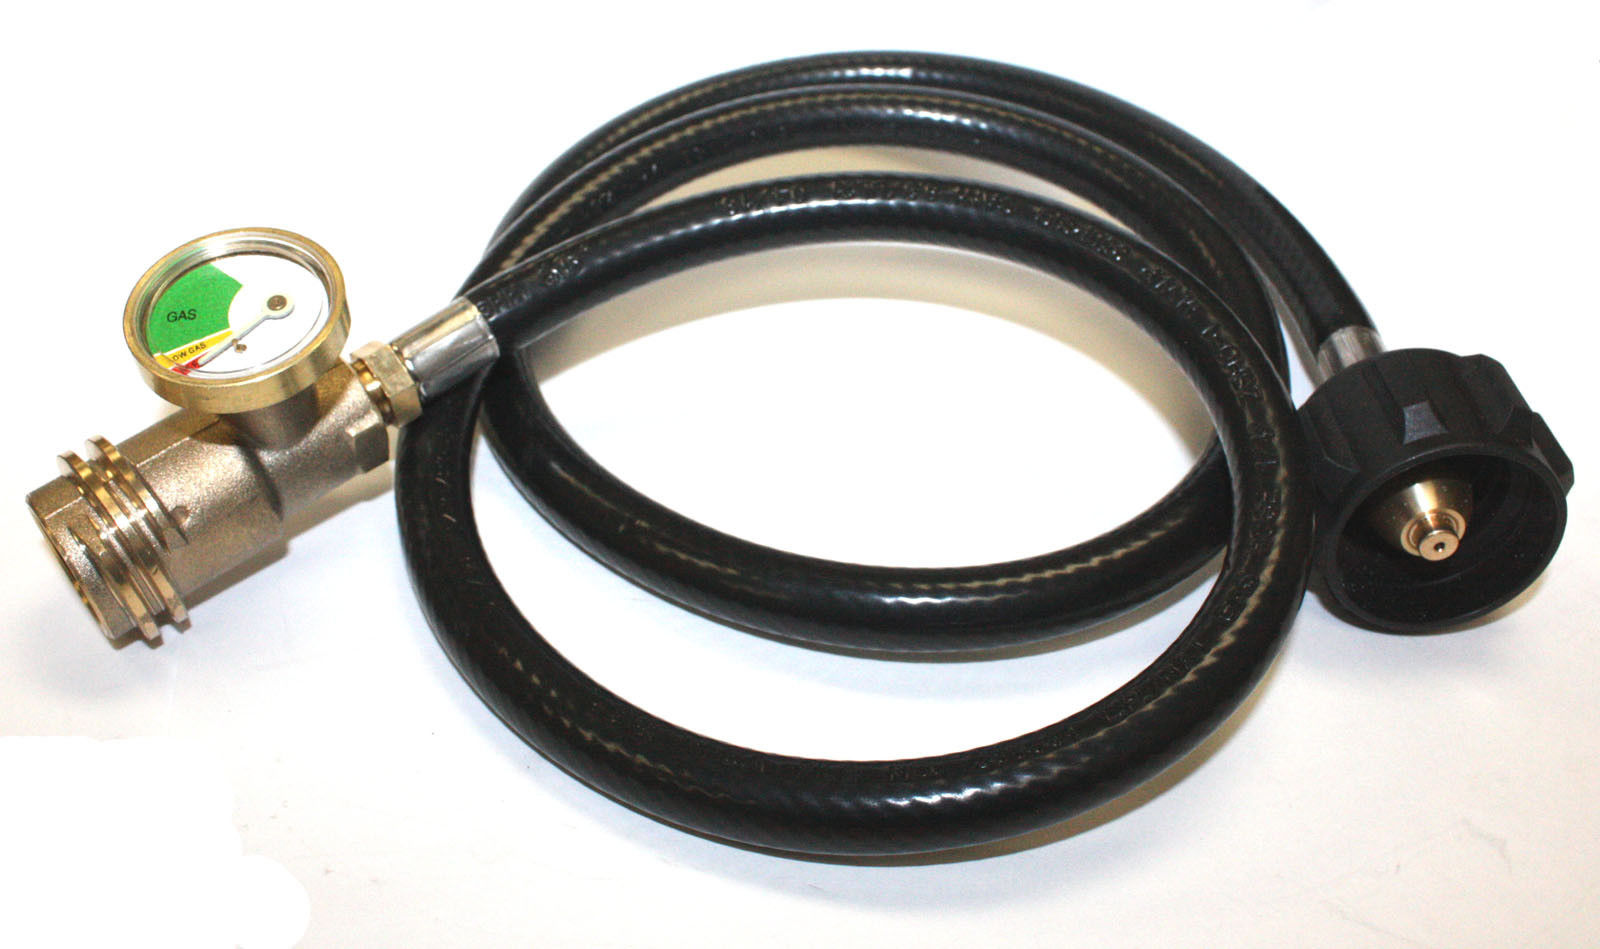 High Pressure Gas Regulator And Hose For L.P Grill RV Propane 4ft 1/8 MNPT Pipe 